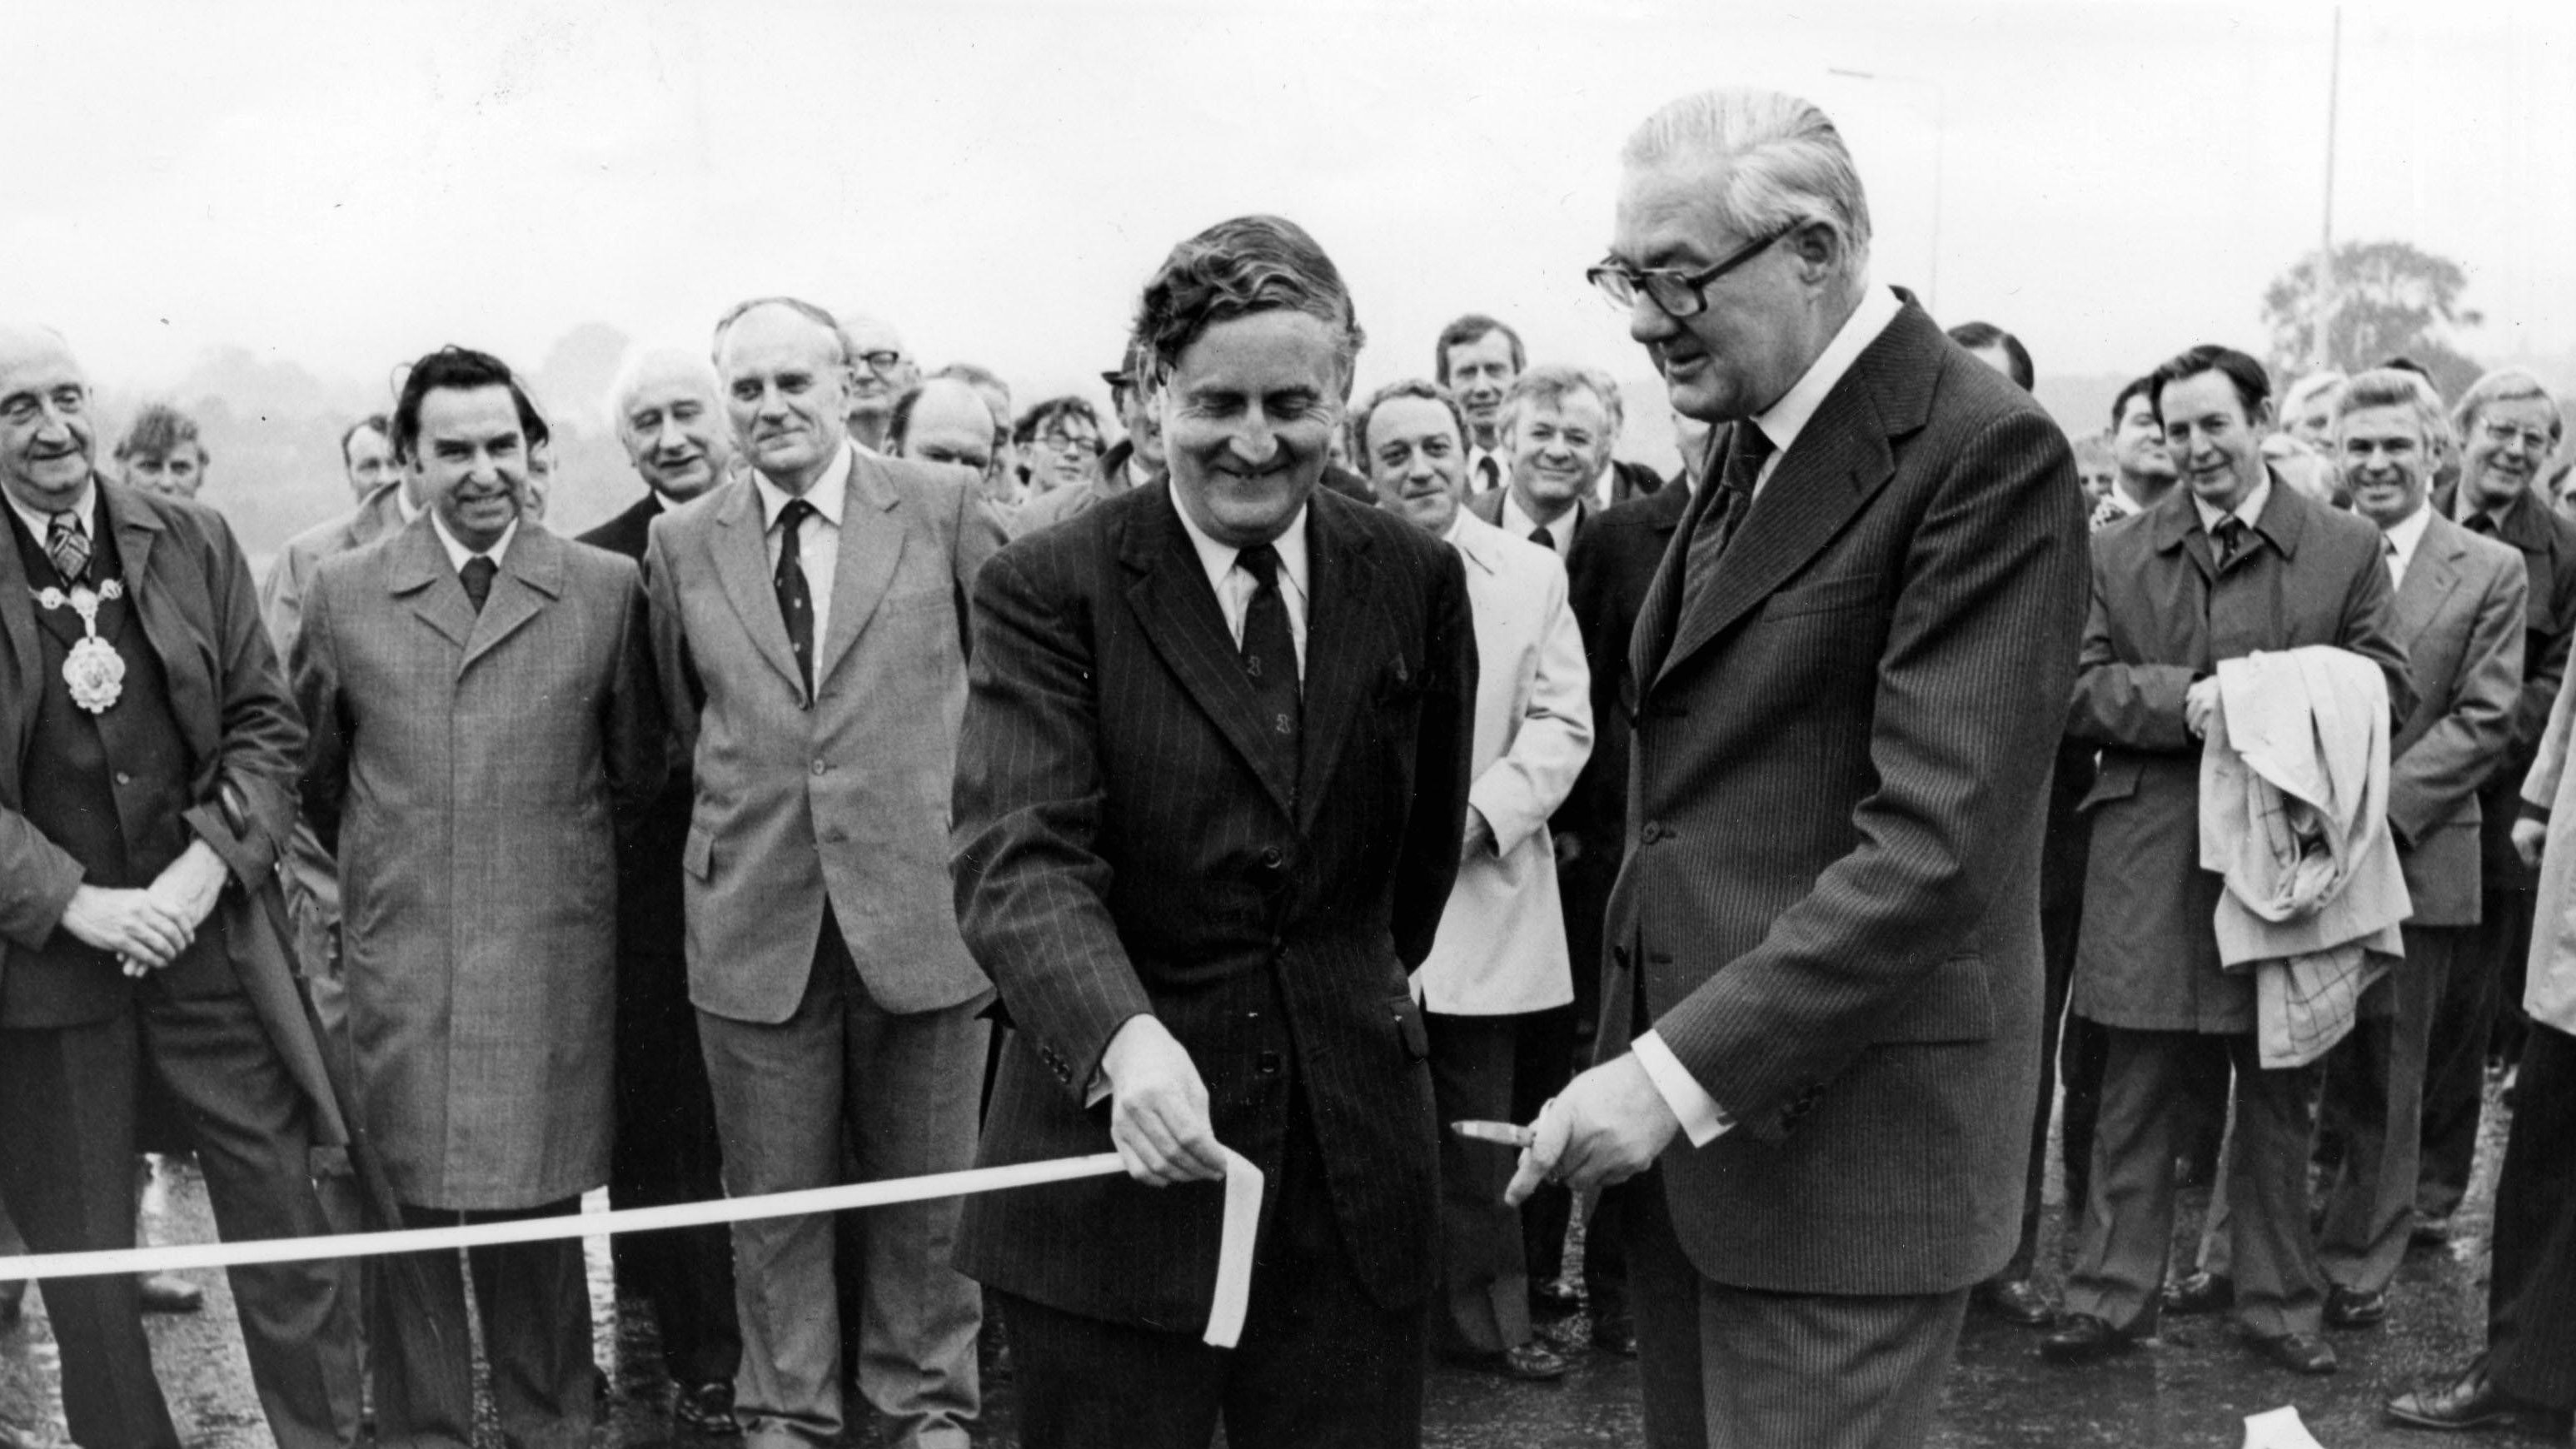 Morris was secretary of state for Wales for James Callaghan, right, and Harold Wilson before him